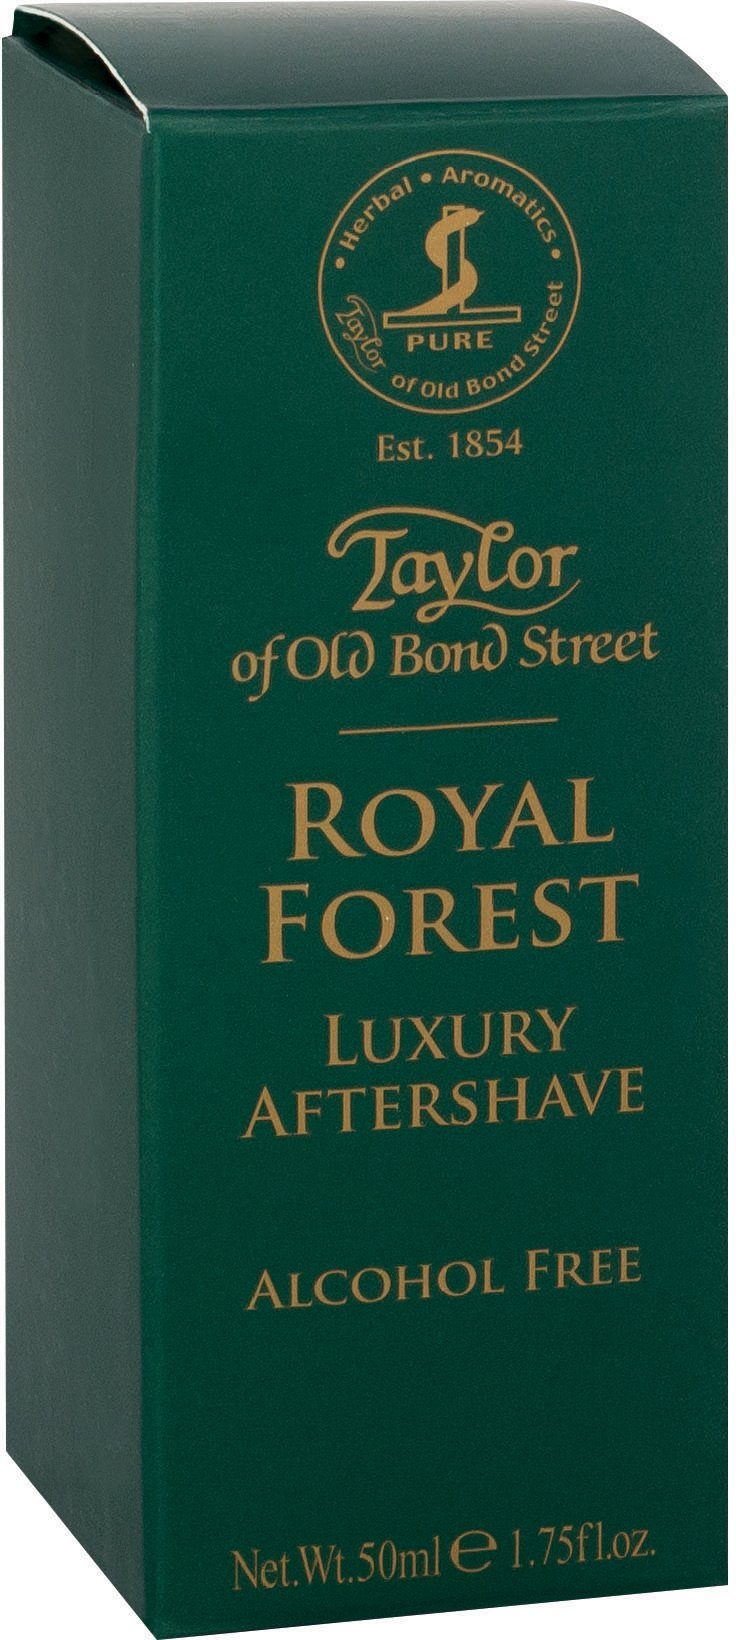 Luxury After-Shave Old Forest Royal Street Bond Aftershave Taylor of